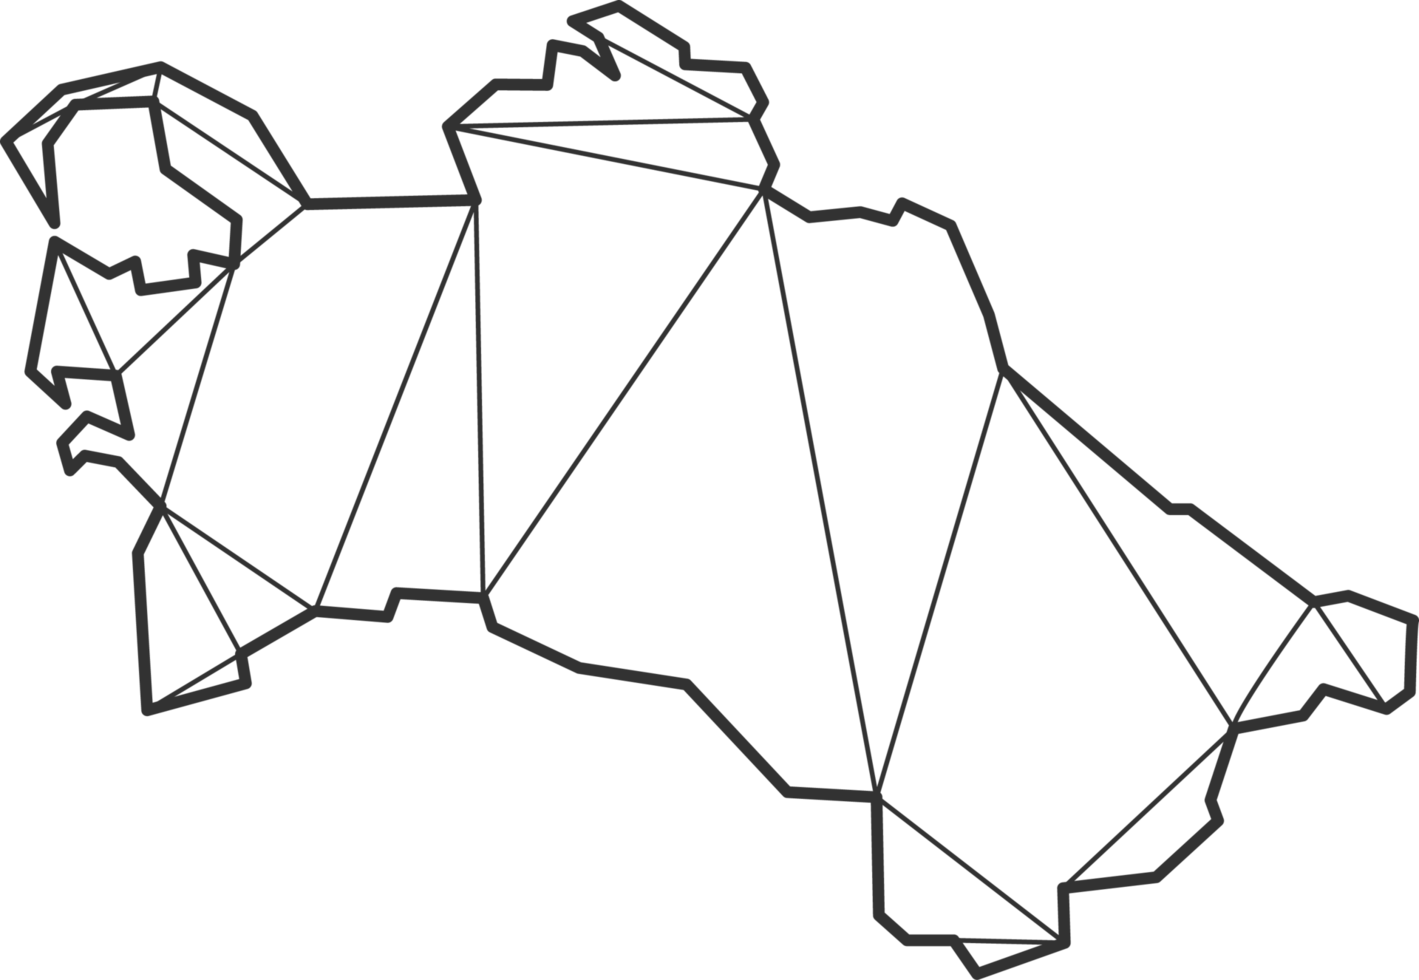 Mosaic triangles map style of Turkmenistan. png